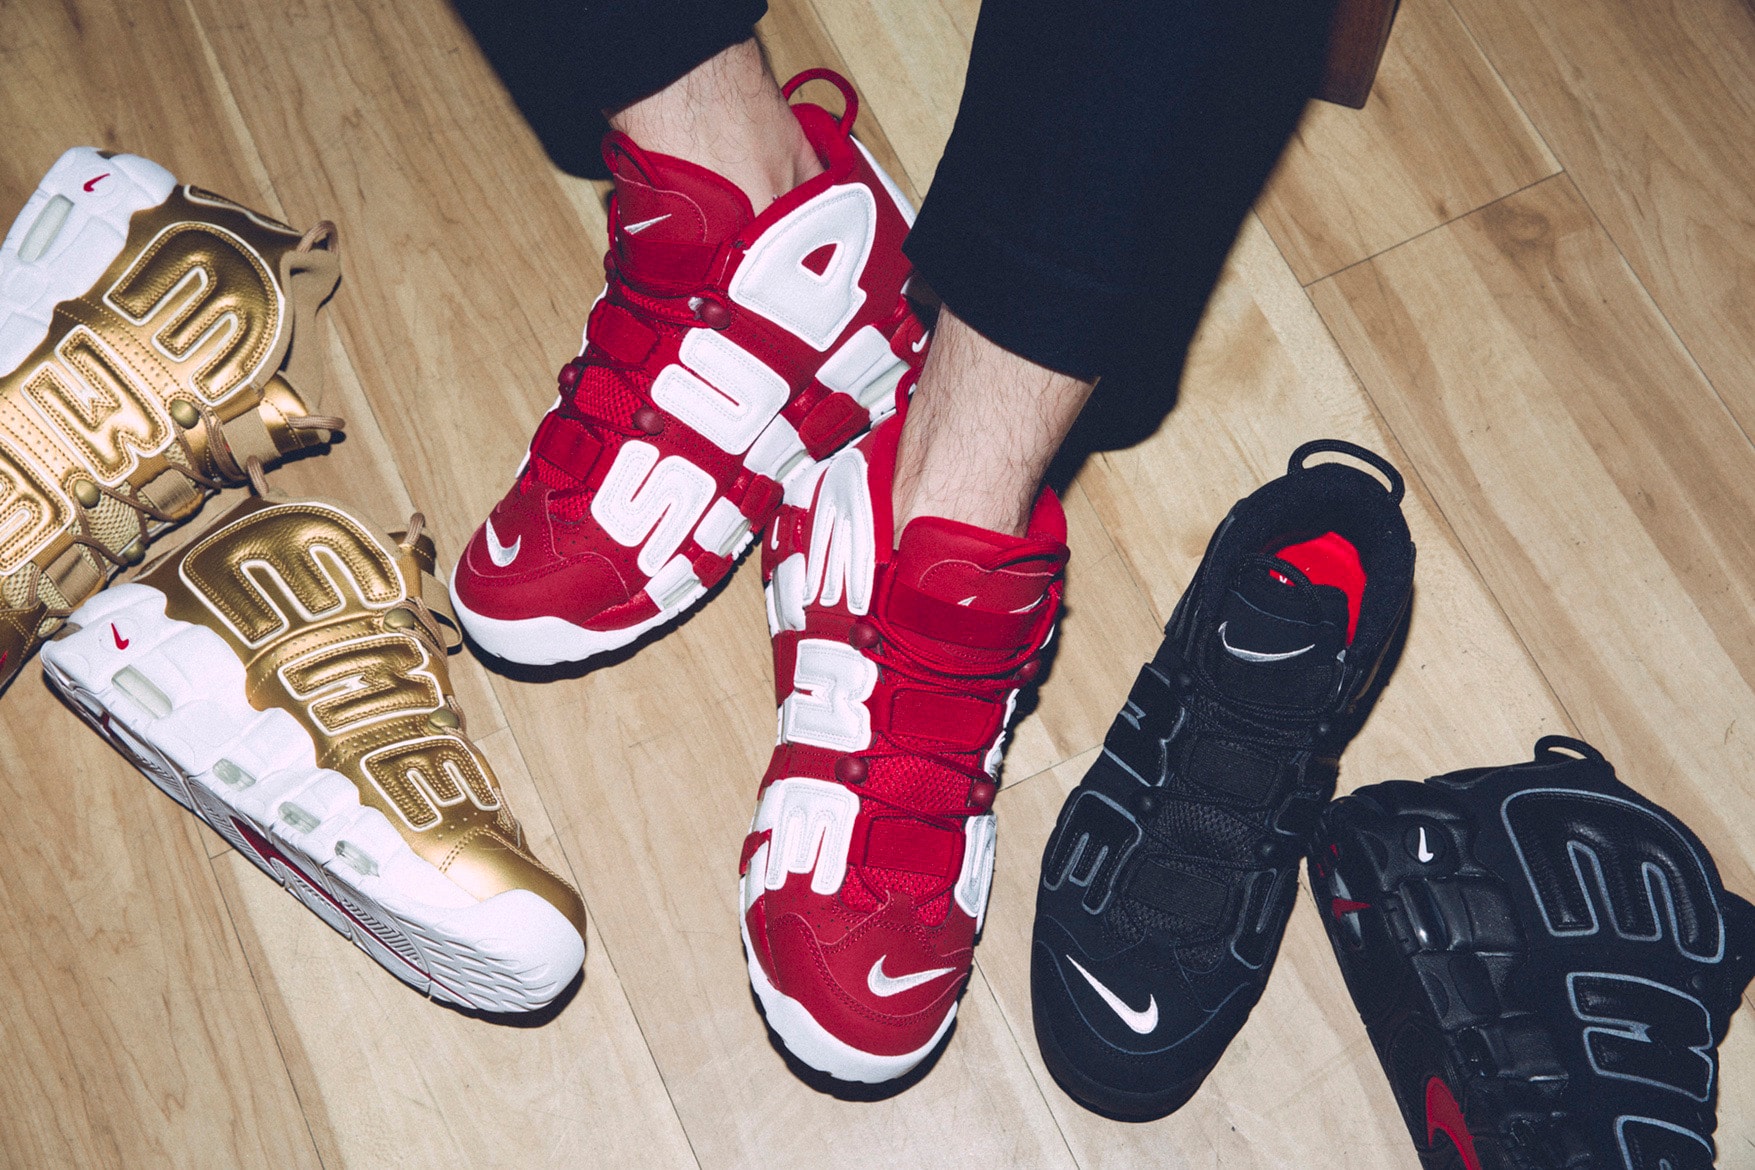 Supreme x Nike Air More Uptempo Official Release Info & Images